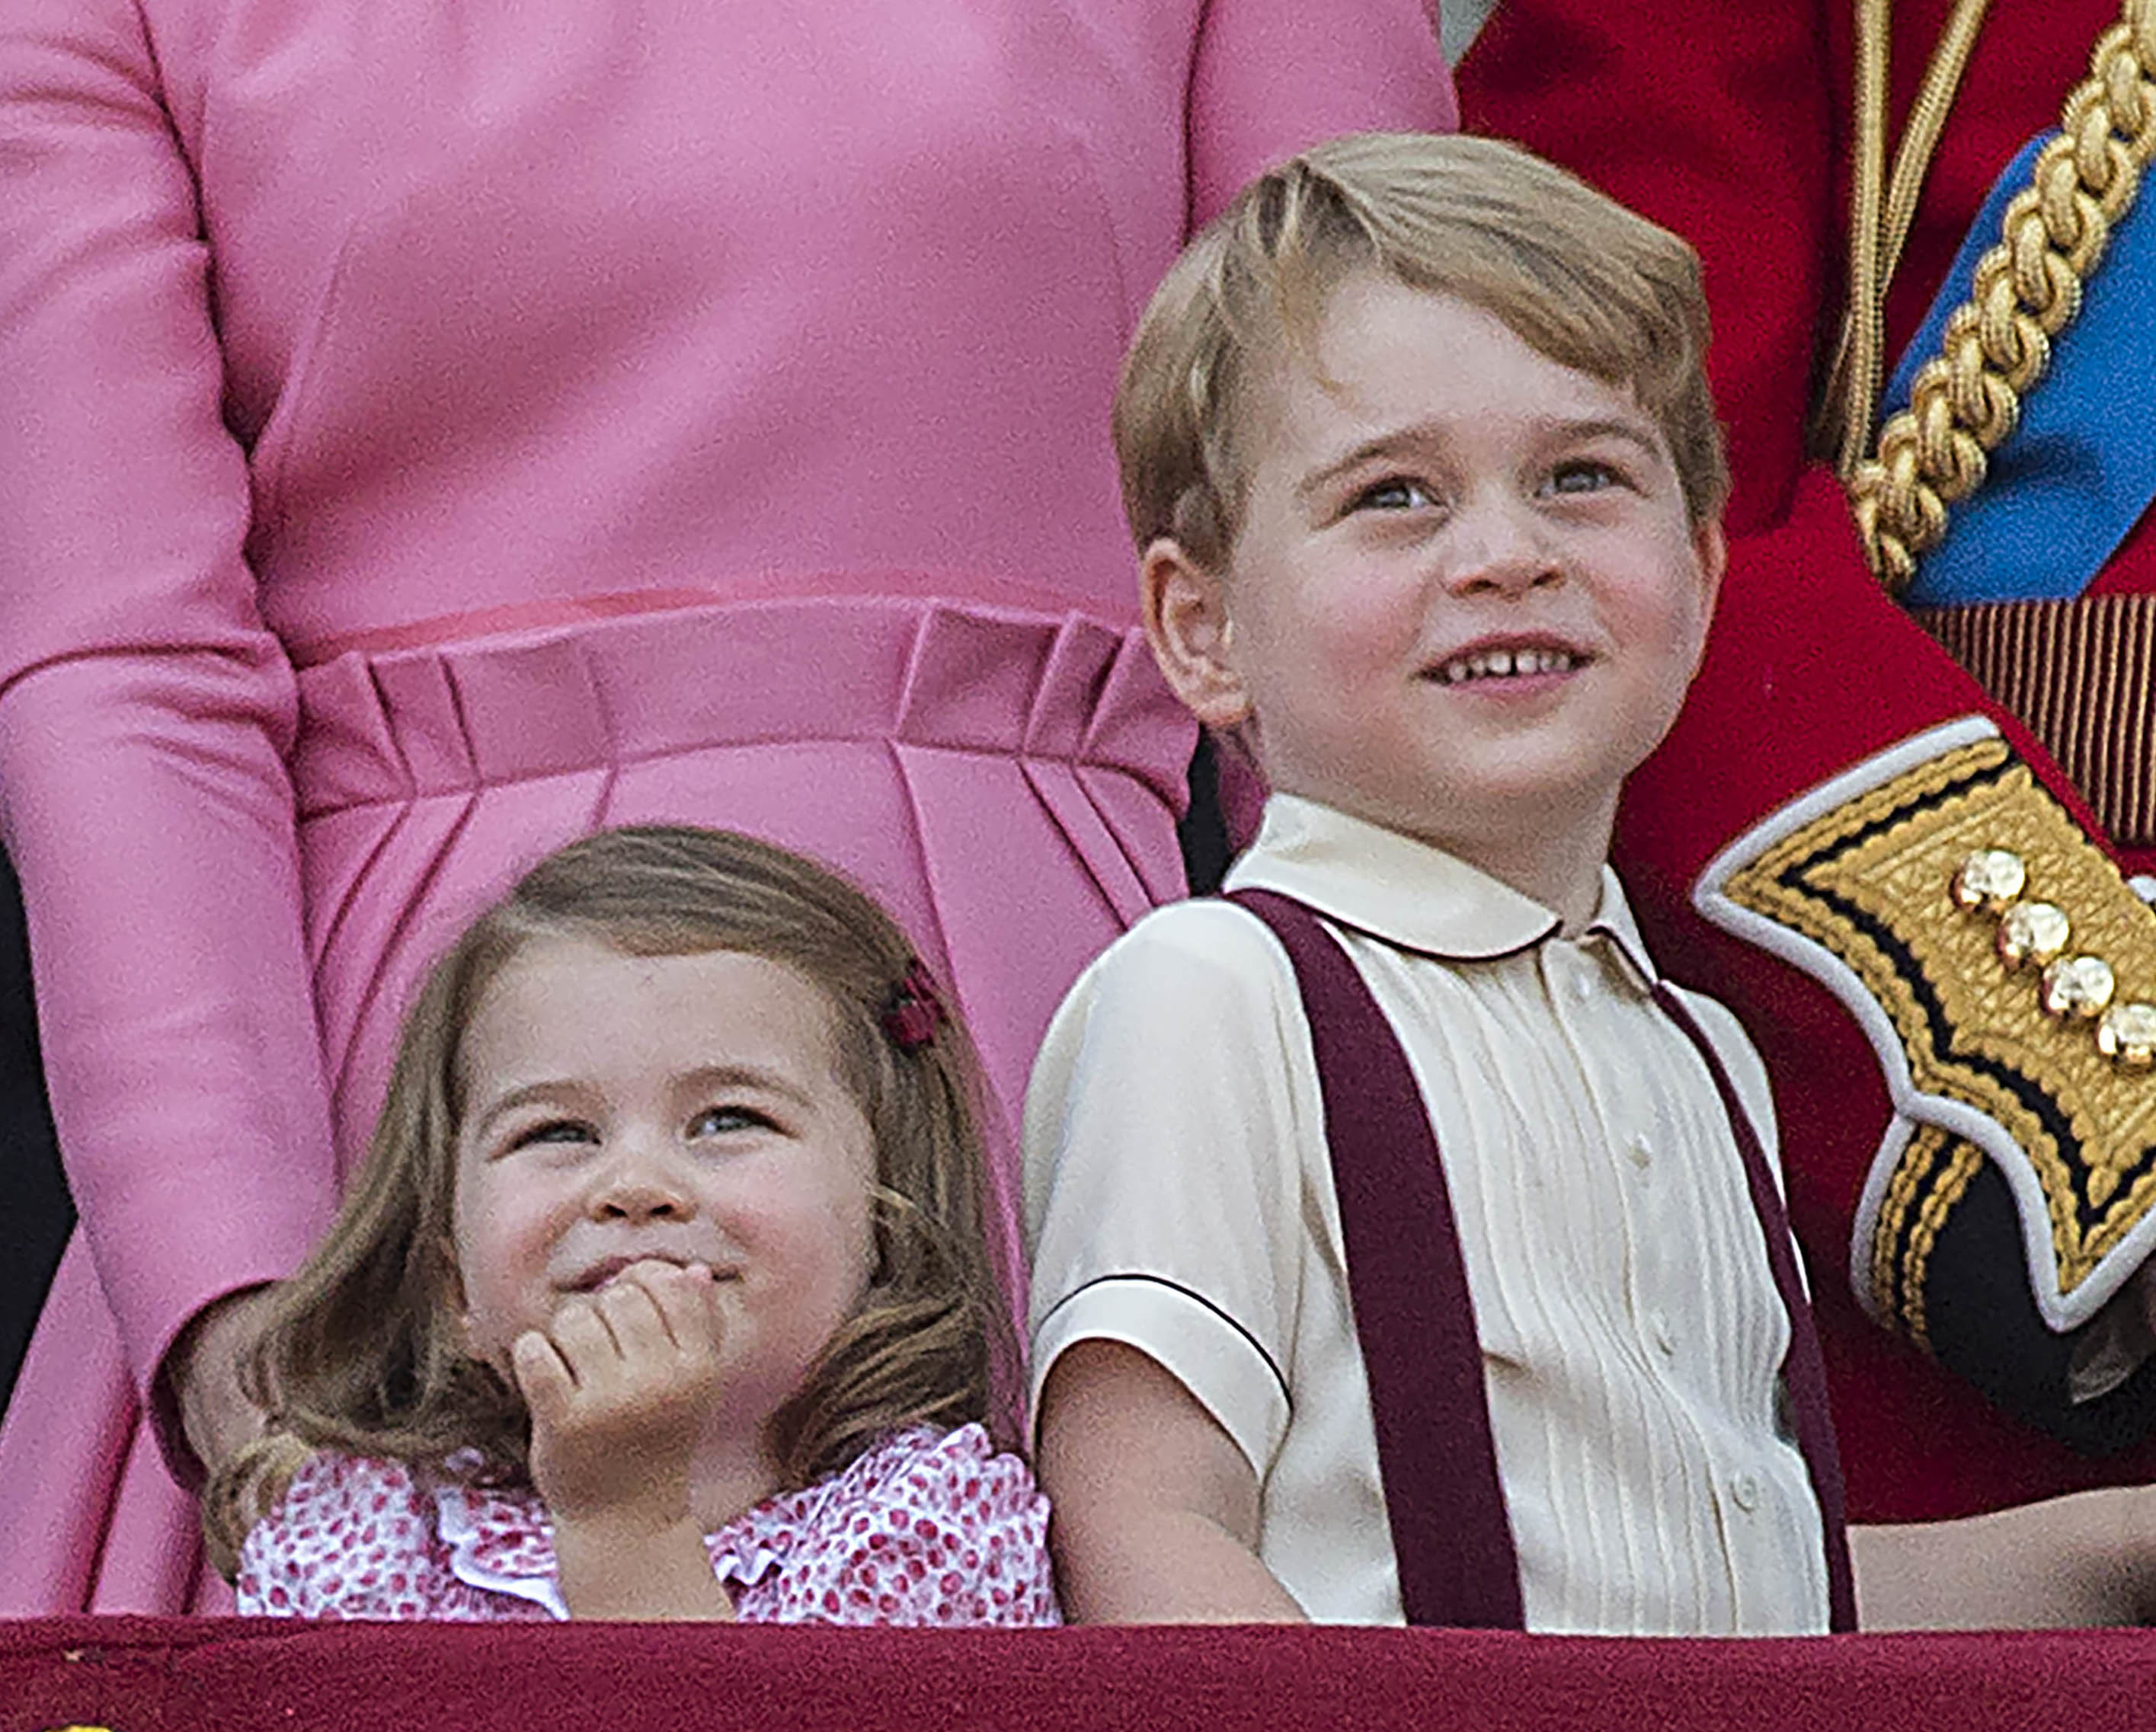 <p>Princess Charlotte and Prince George were delighted by the airplanes and crowds during the annual Trooping the Colour in London on July 17, 2017.</p>